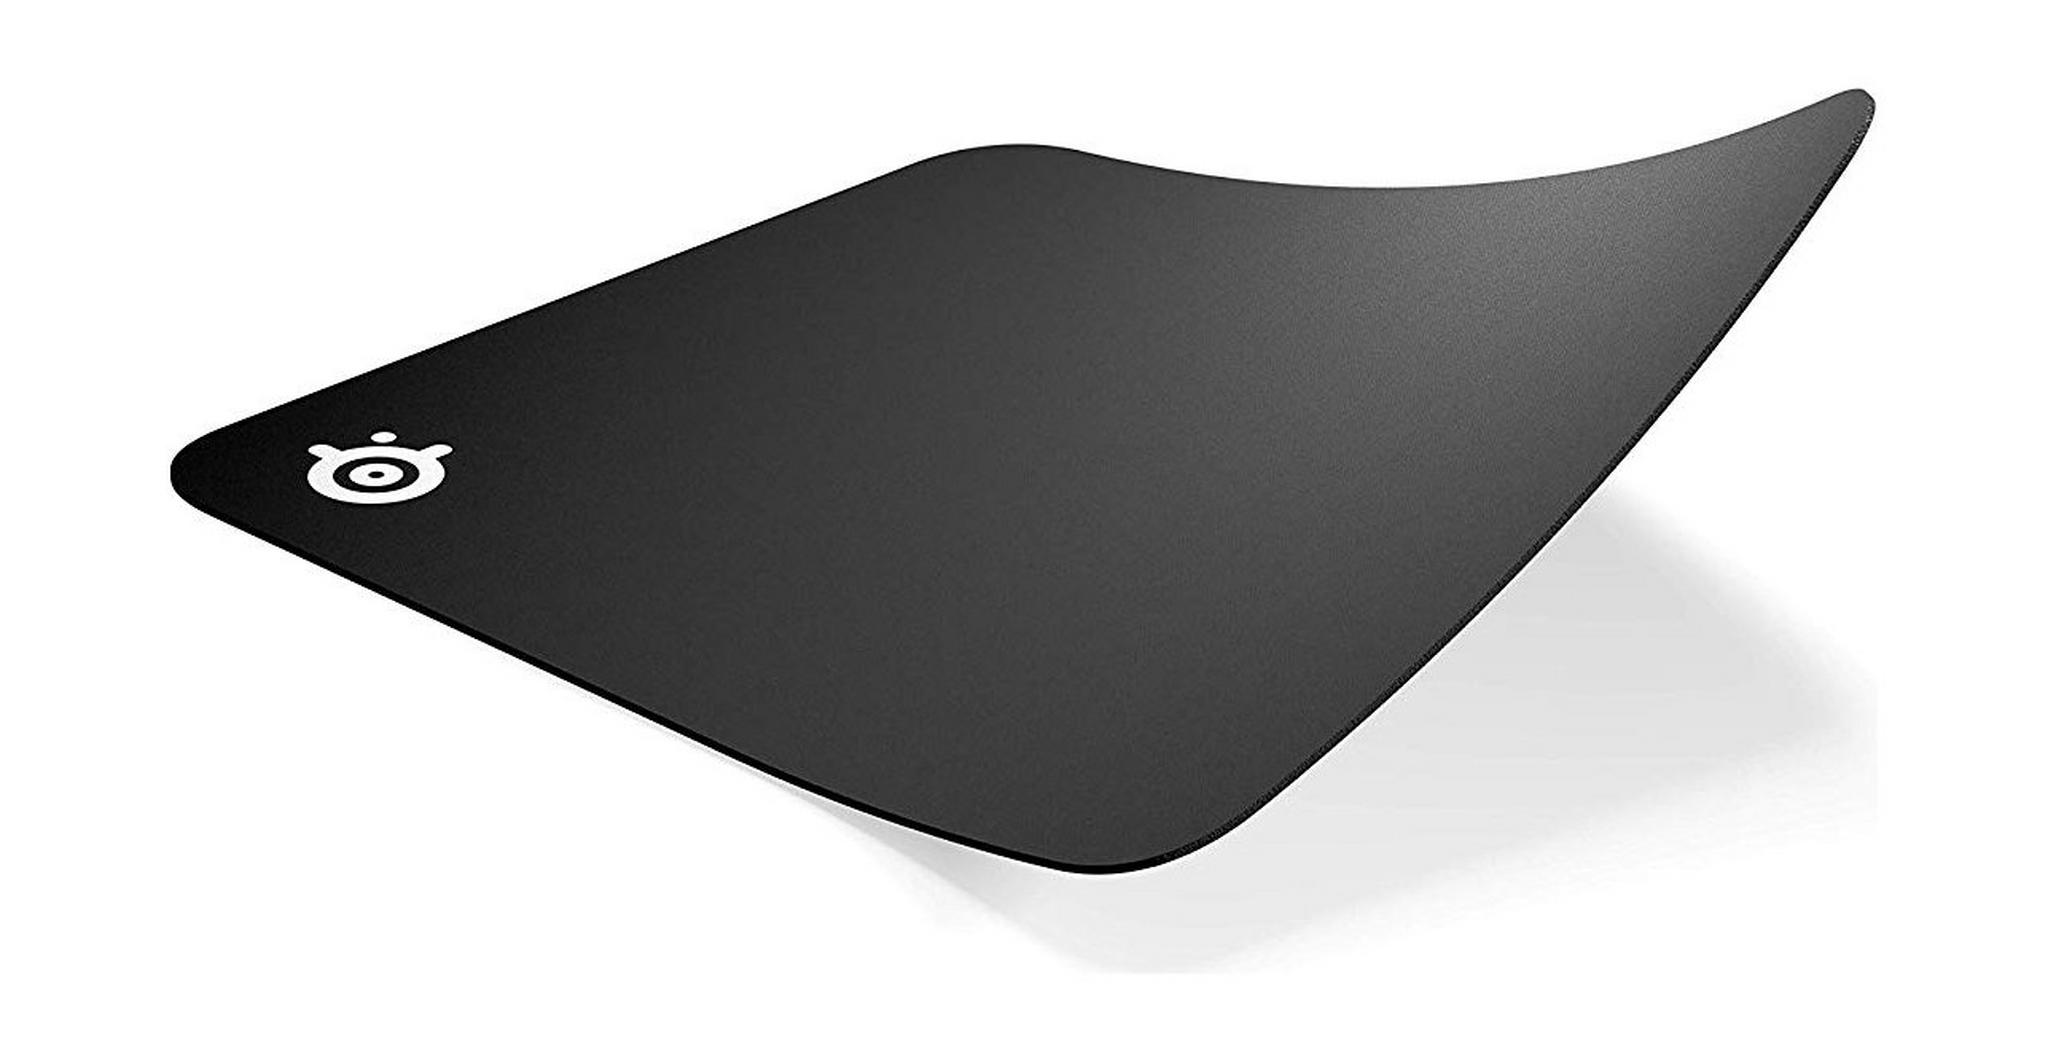 SteelSeries QcK 63004 Gaming Mouse Pad - Black